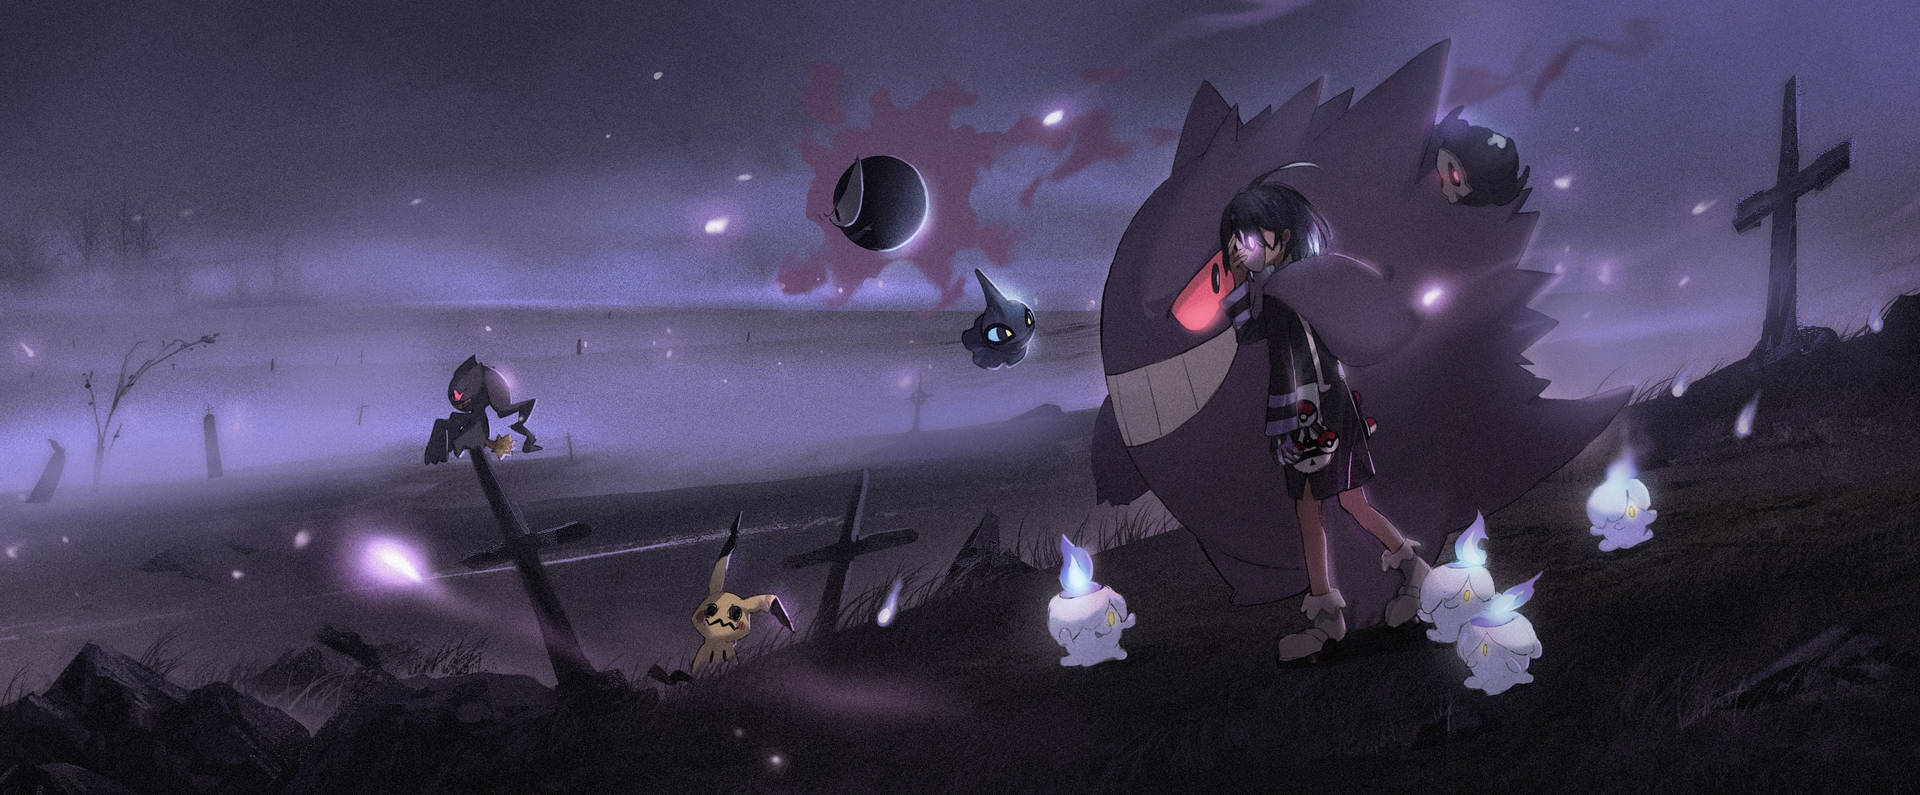 The Ghostly Gengar Waits In The Graveyard Wallpaper